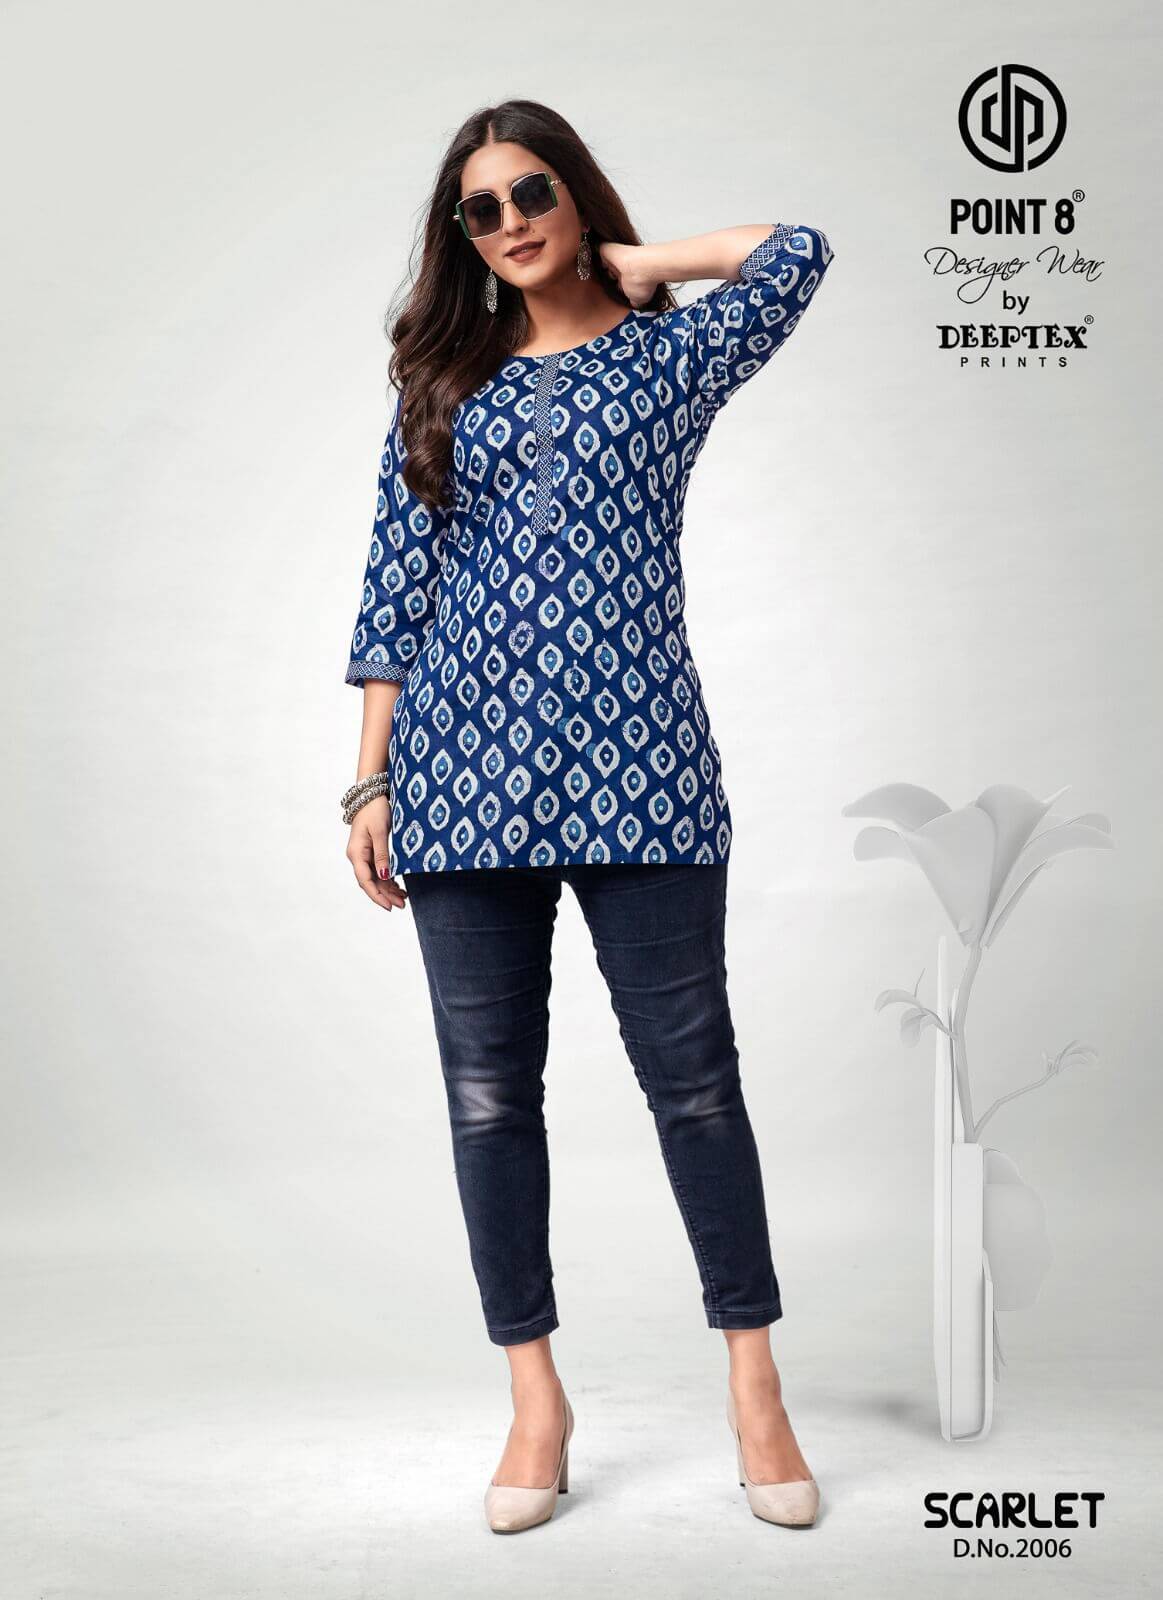 Deeptex Point 8 Scarlet vol 2 Ladies Tops Catalog collection 5